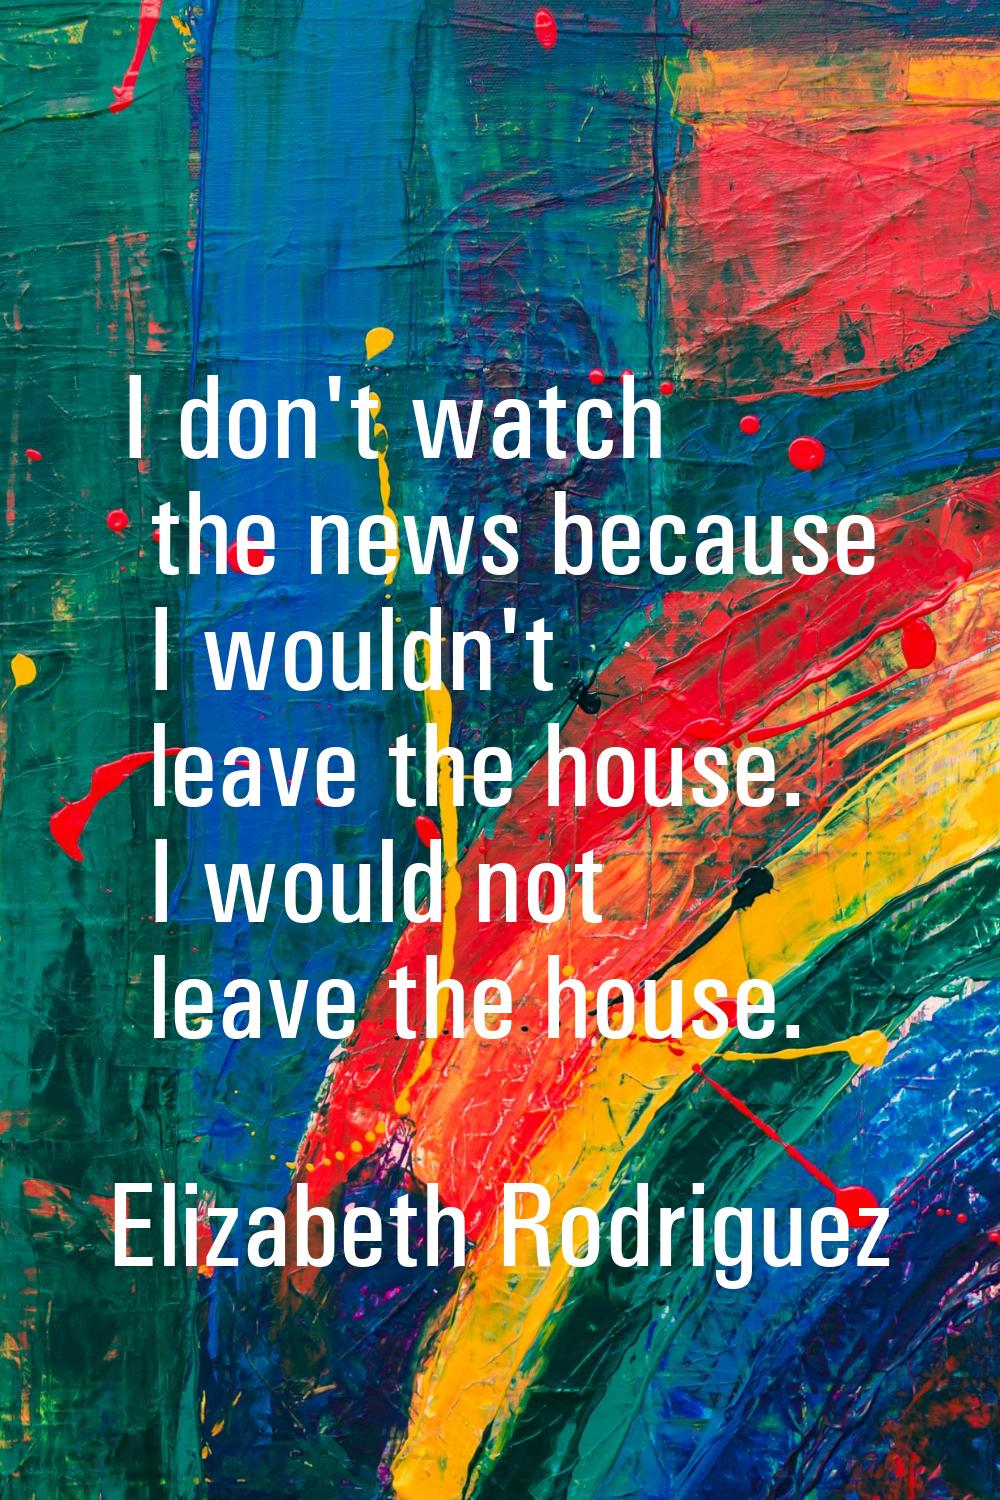 I don't watch the news because I wouldn't leave the house. I would not leave the house.